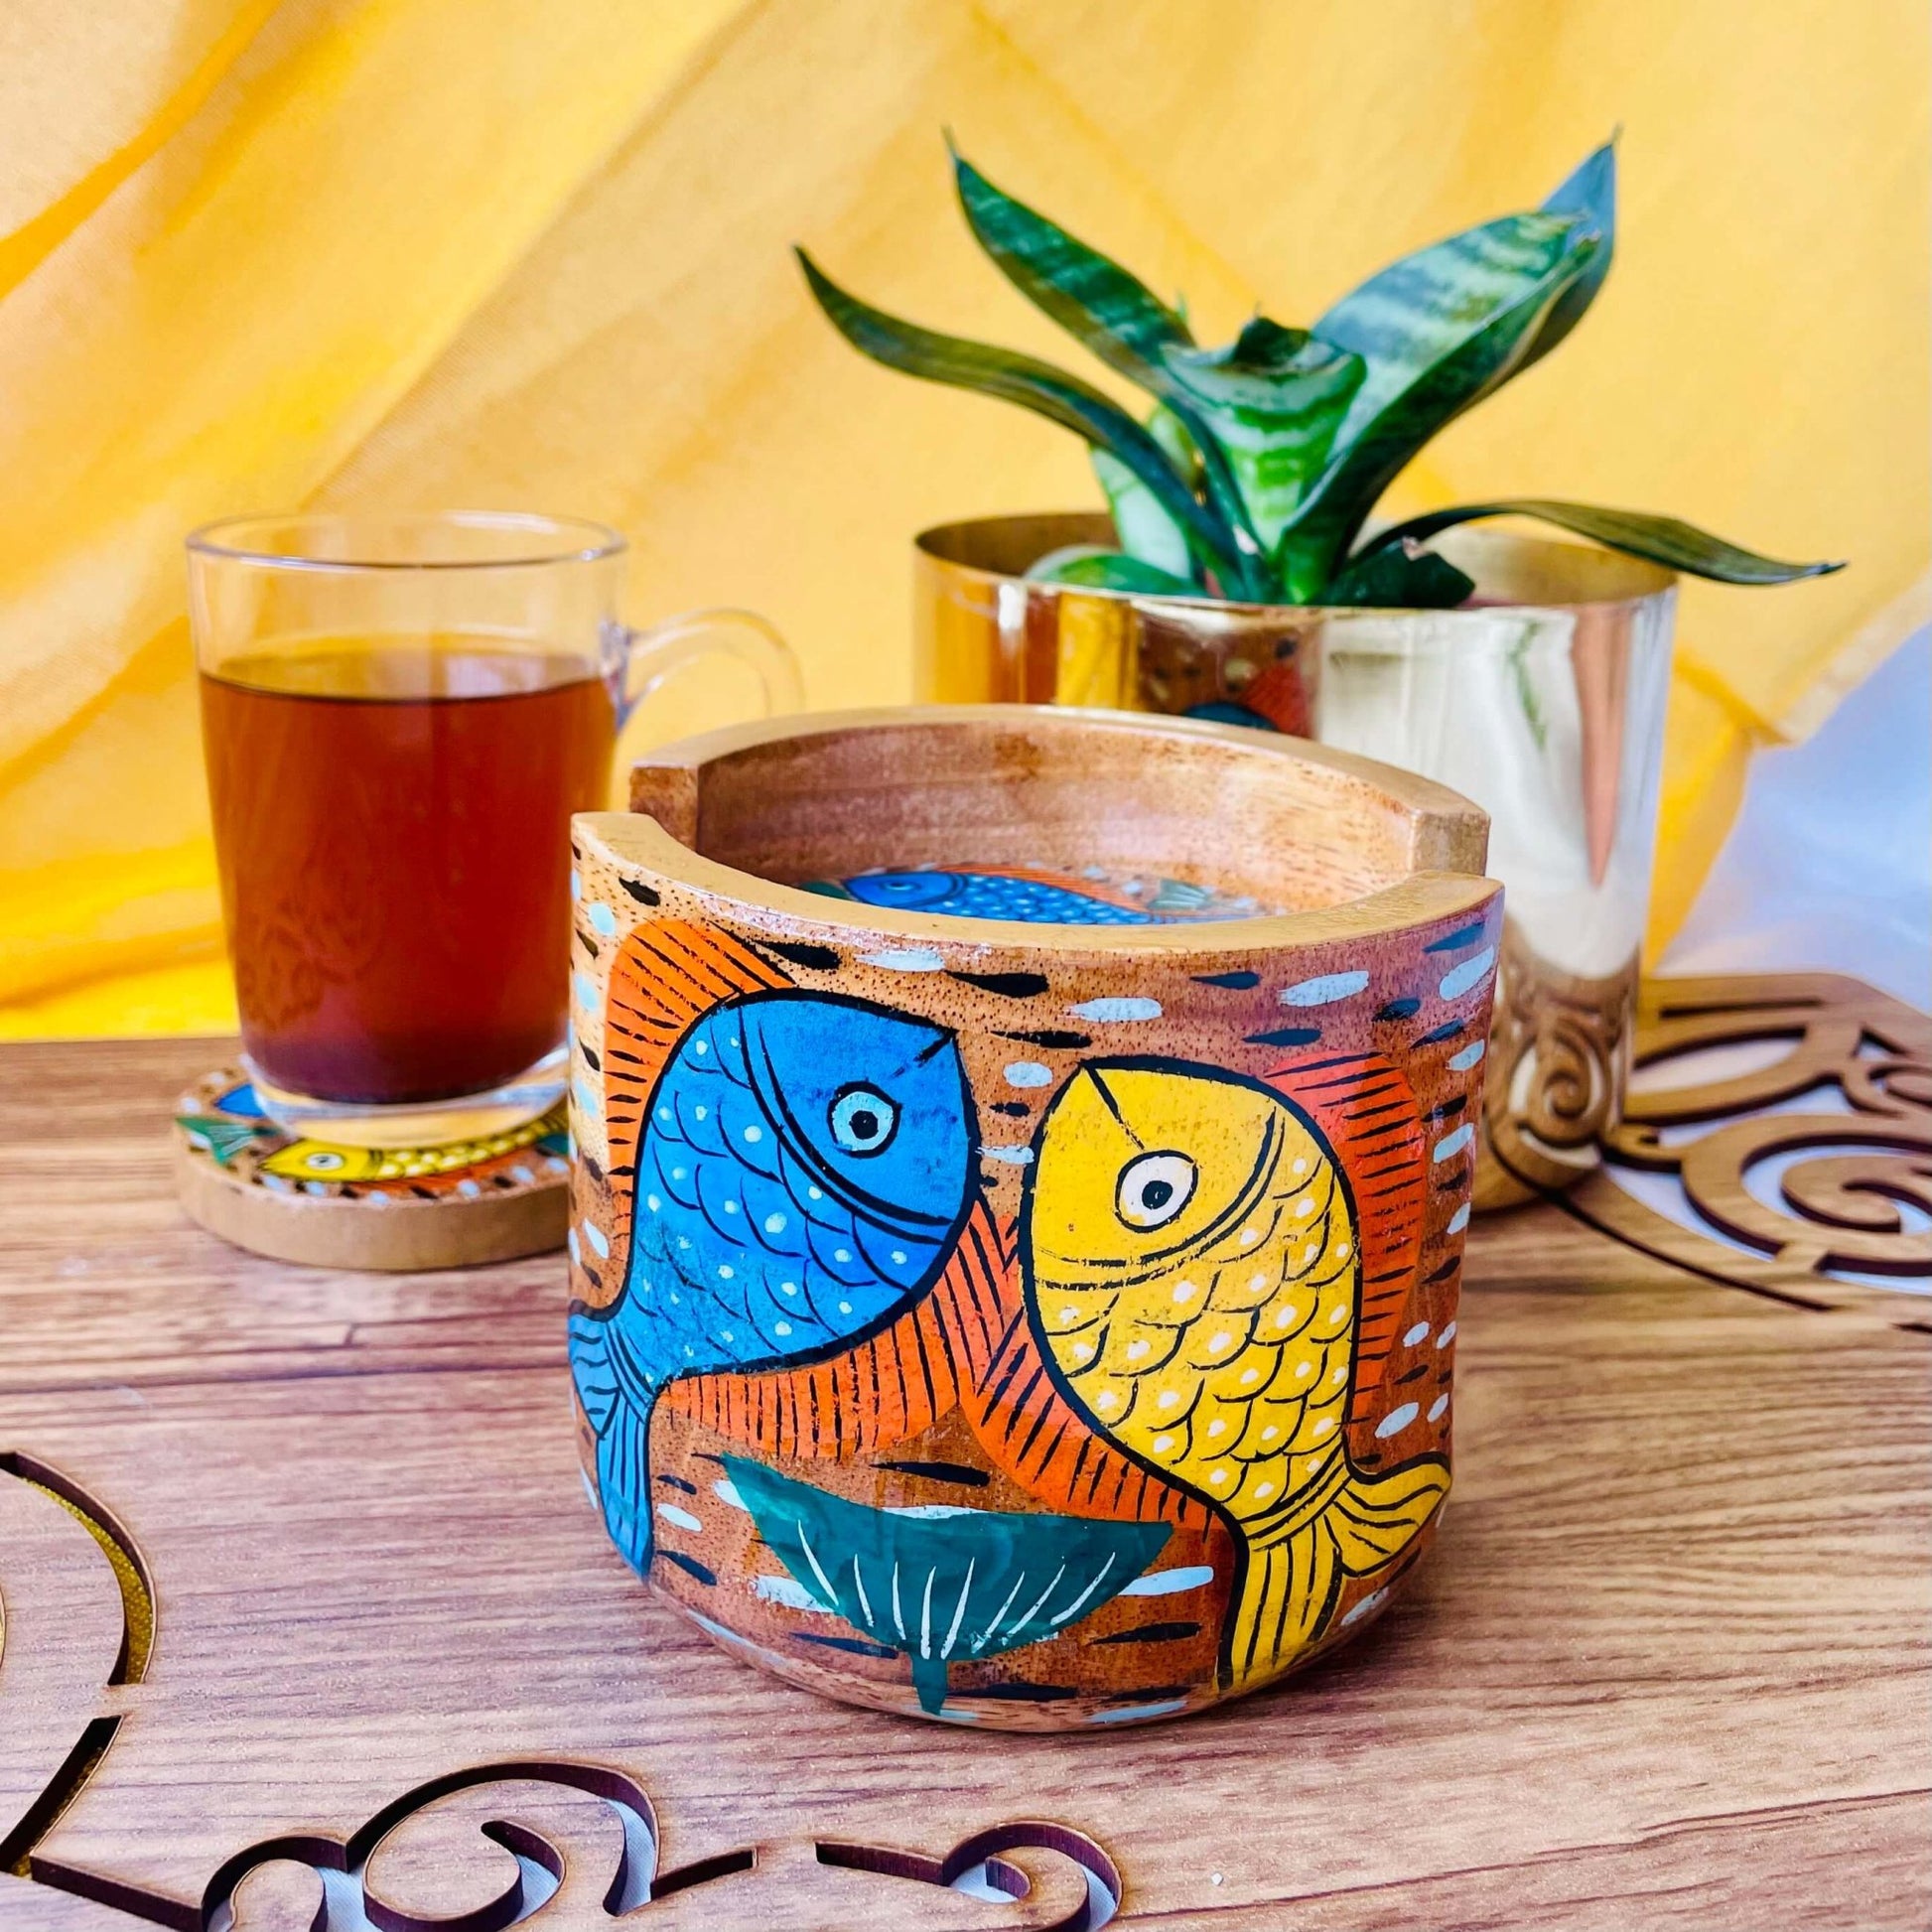 pure mango wood round wooden coaster holder with blue and yellow fish painted on it is being displayed with a warm cup of black tea and plant pot in the background.